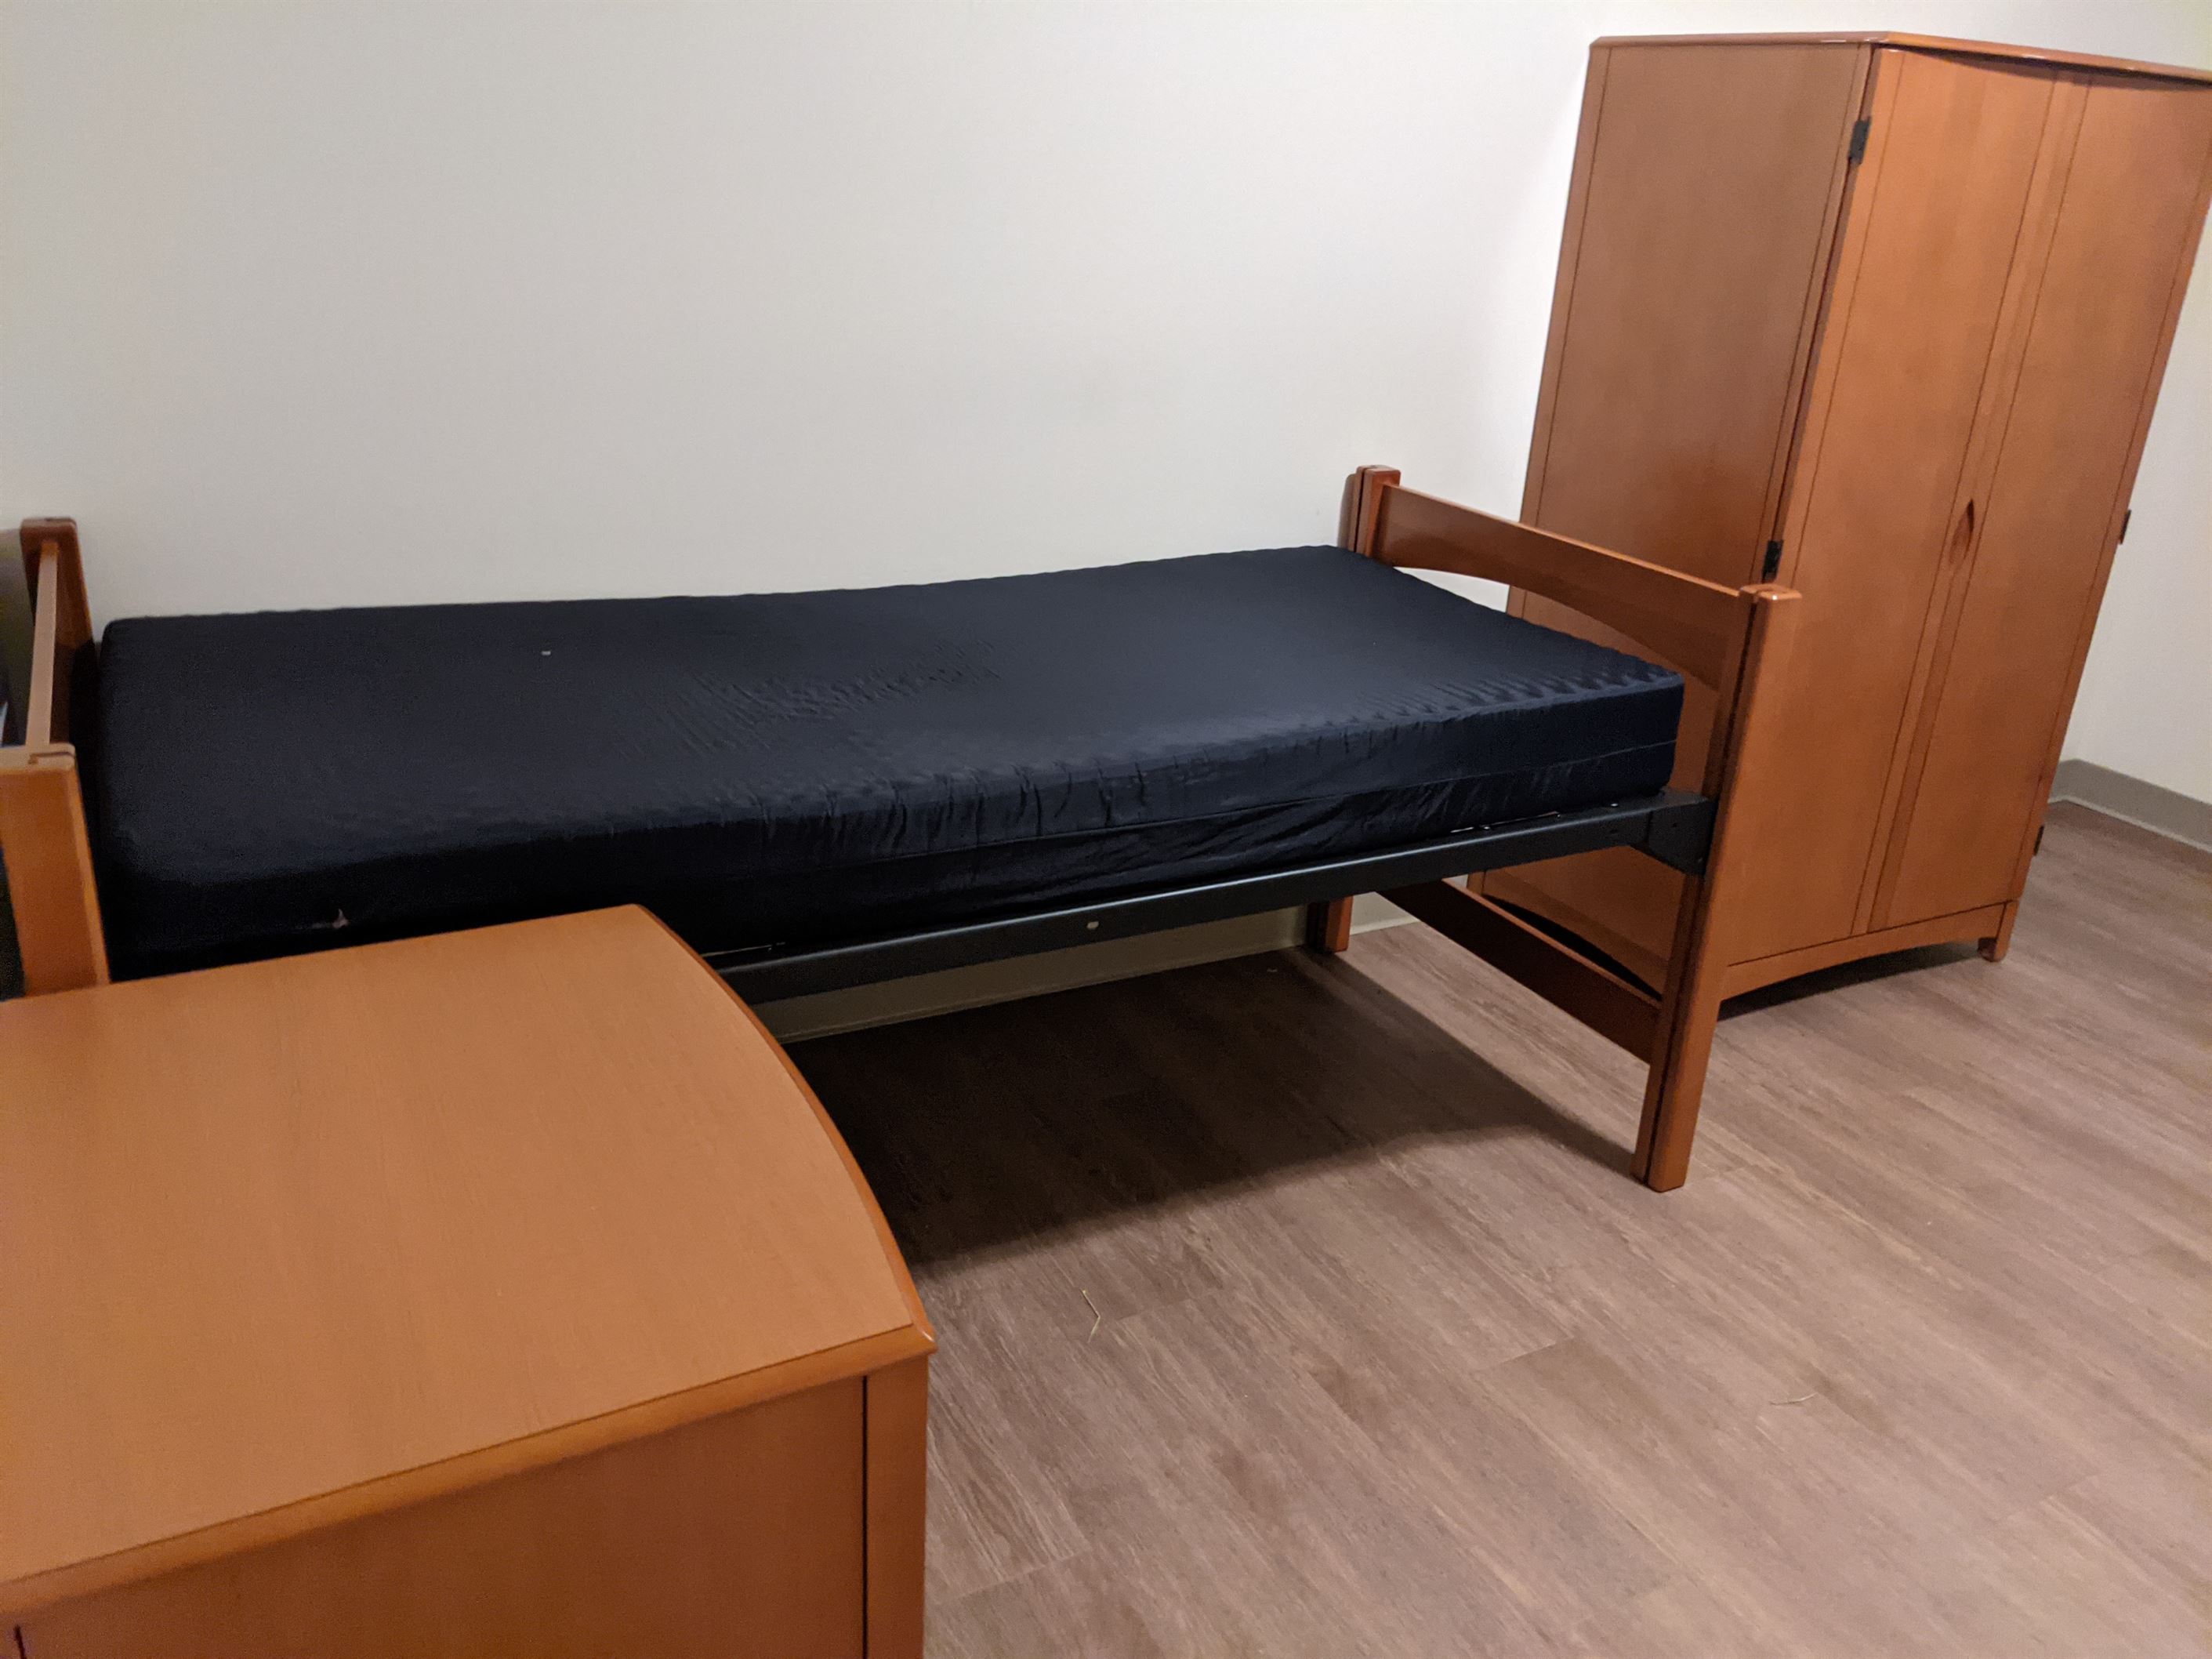 My COVID-cation apartment has been emptied out in order to move back downstairs. Casey Masterson | The Montclarion